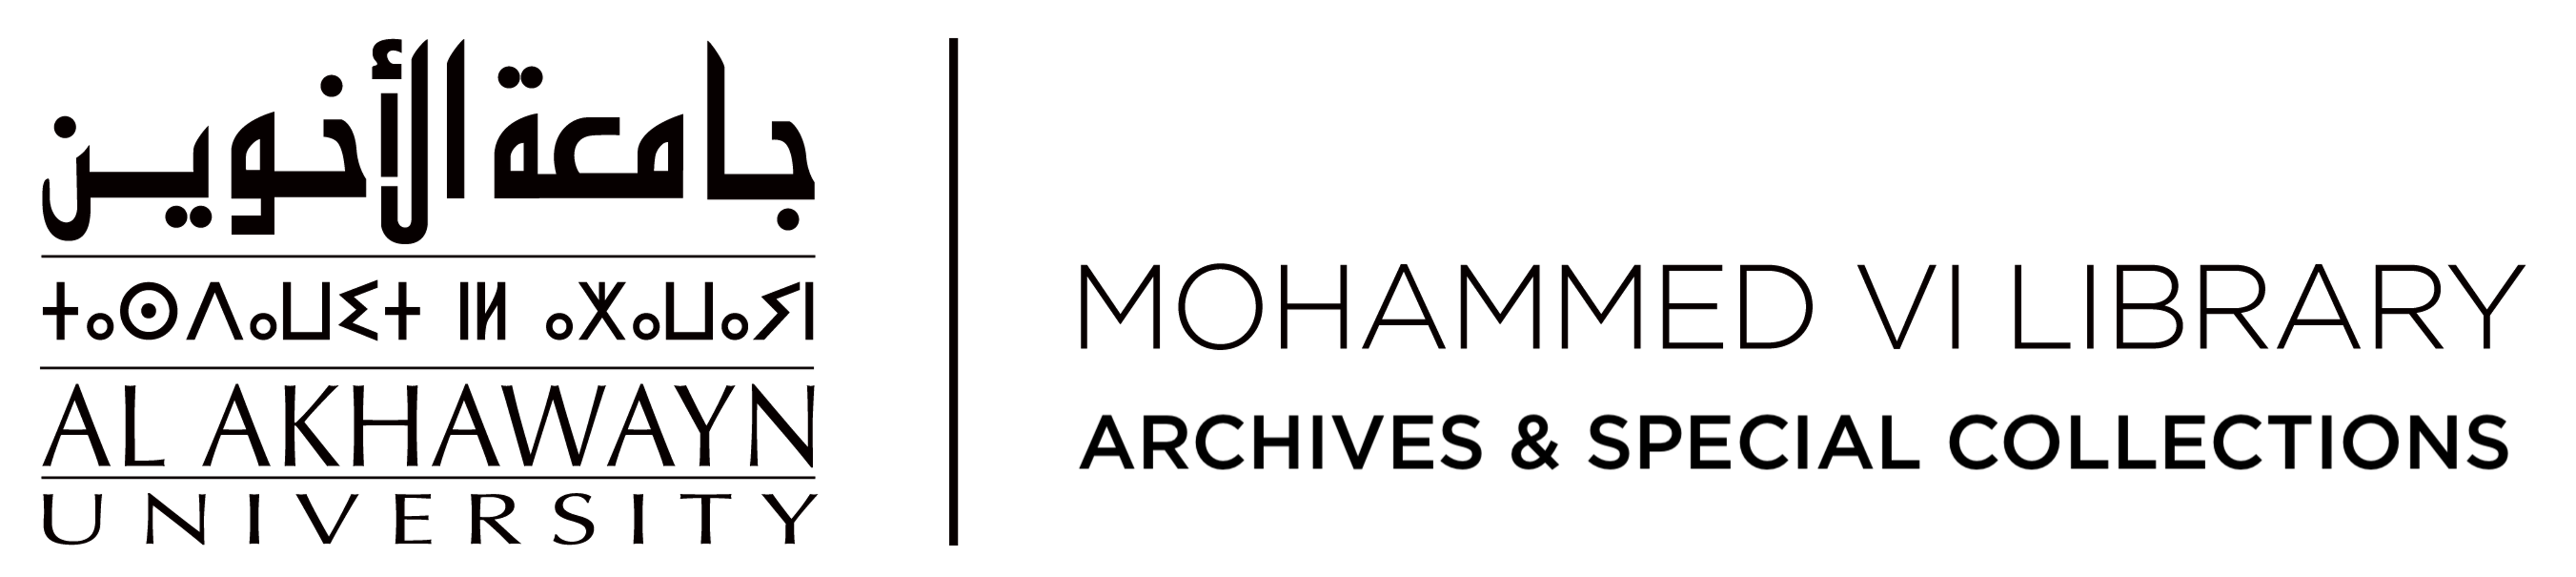 Mohammed VI Library Archives and Special Collections